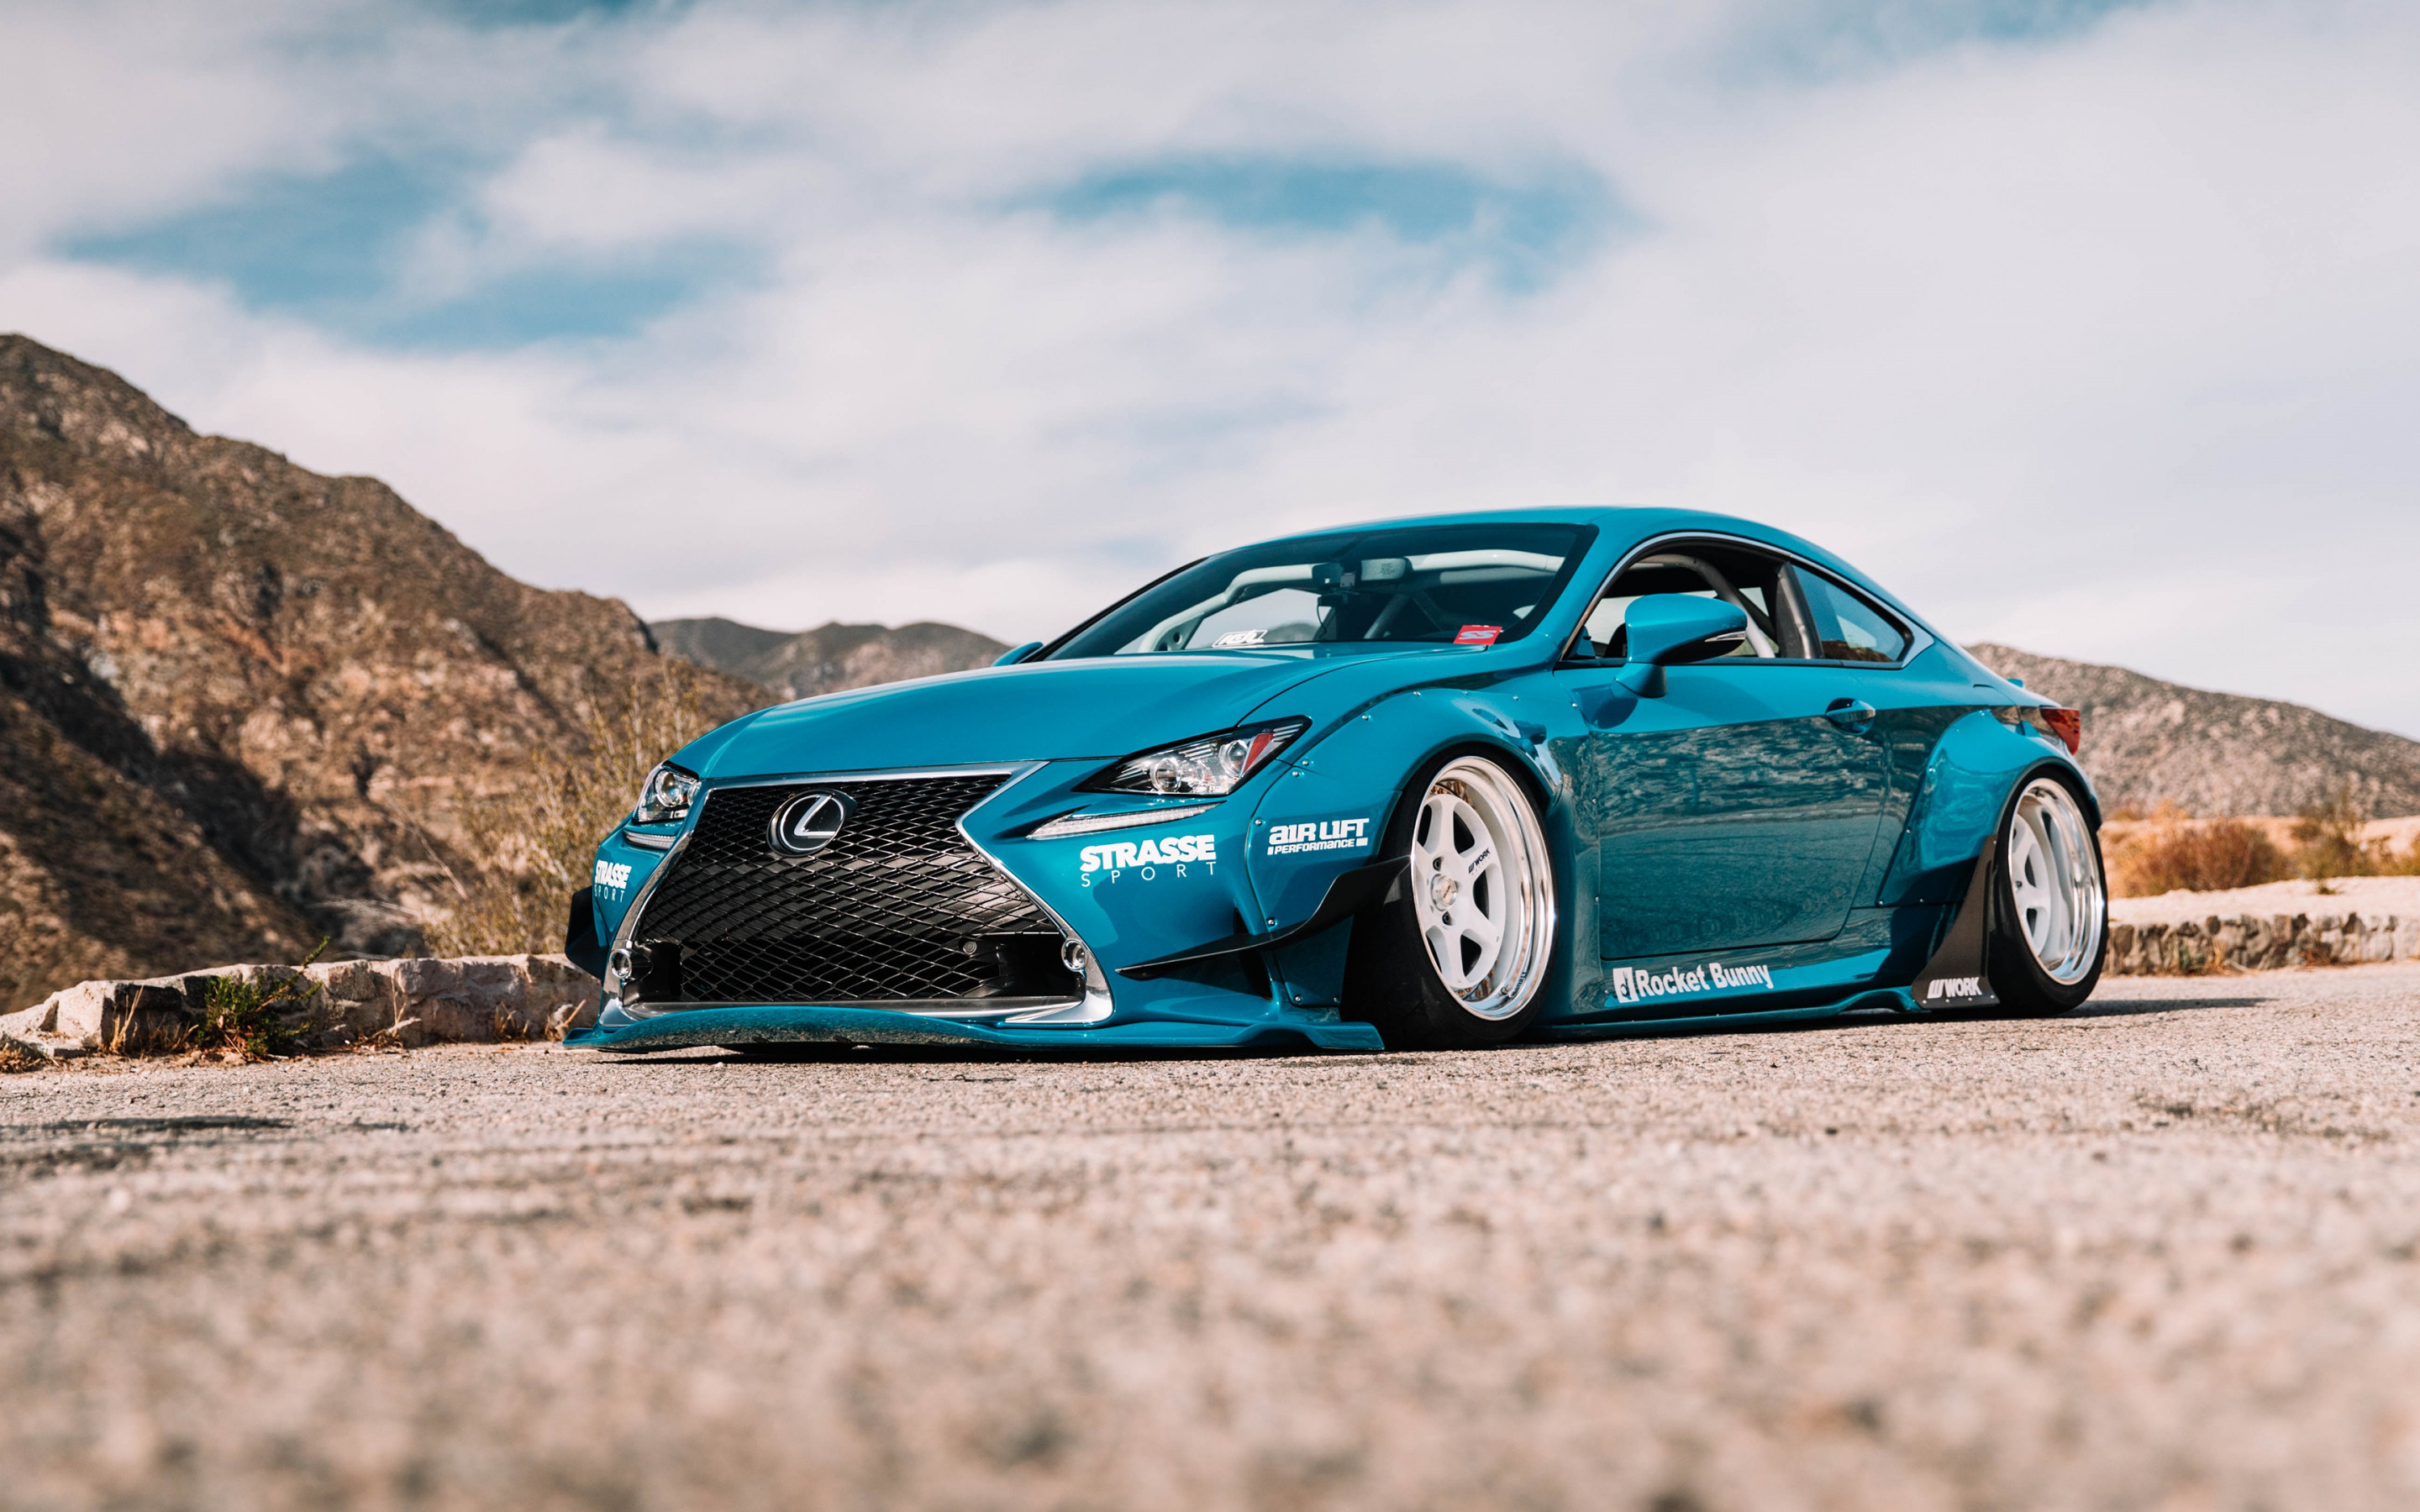 Lexus RC, 2019 blue sports coupe, New RC F, Japanese tuning, 2880x1800 HD Desktop